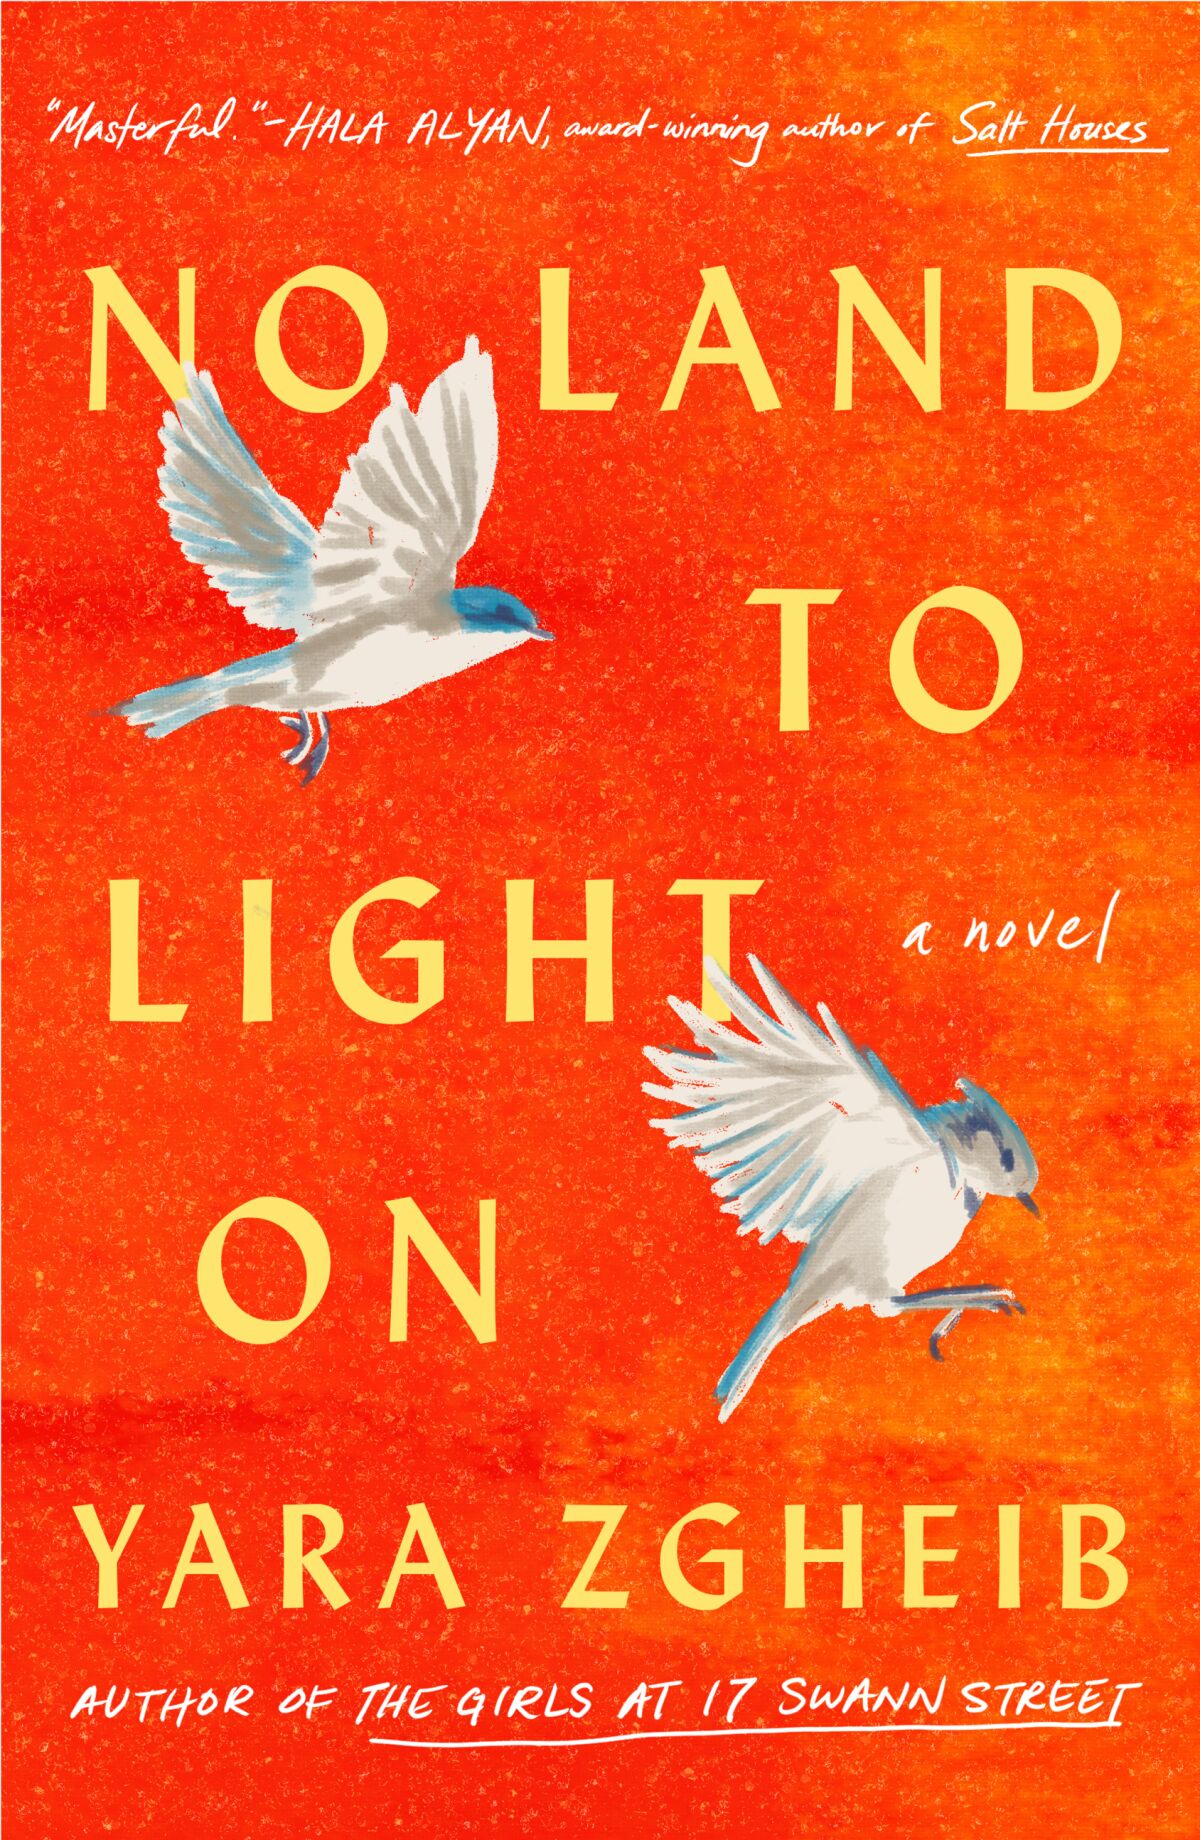 Book cover of "No Land to Light On" by Yara Zgheib